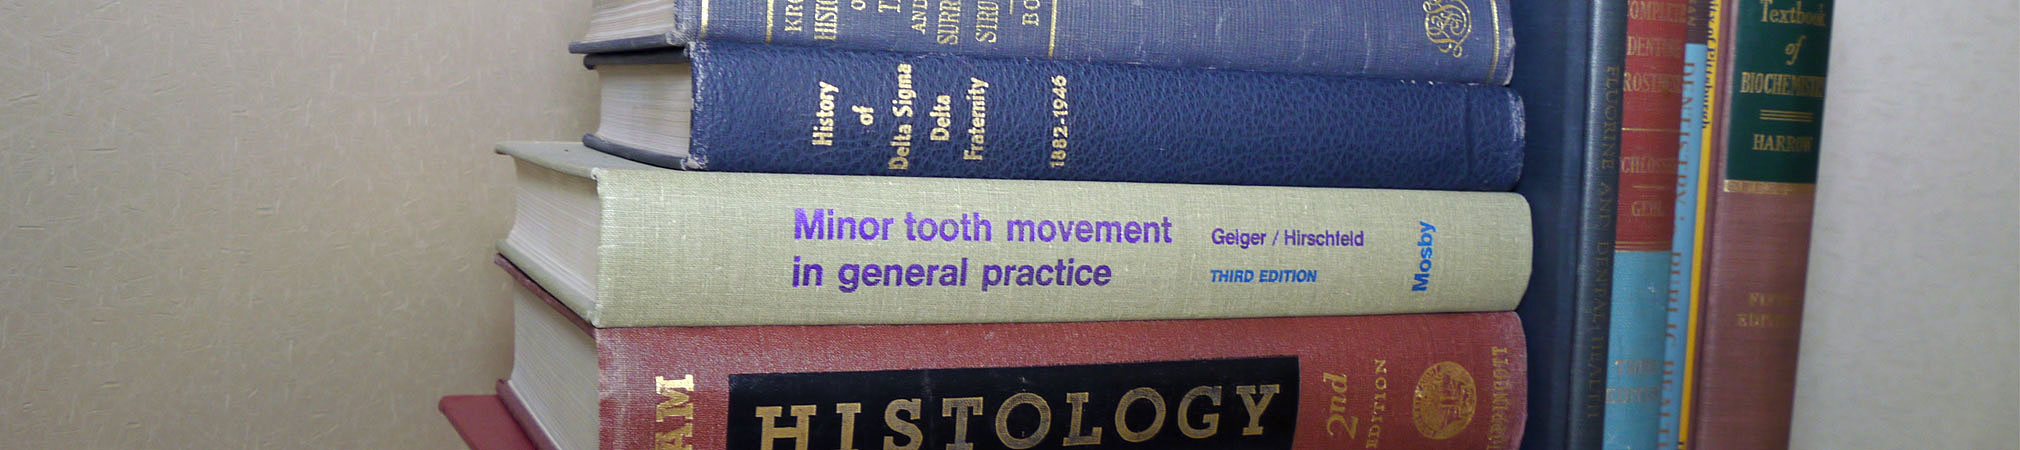 A collection of different books on dental history and practice